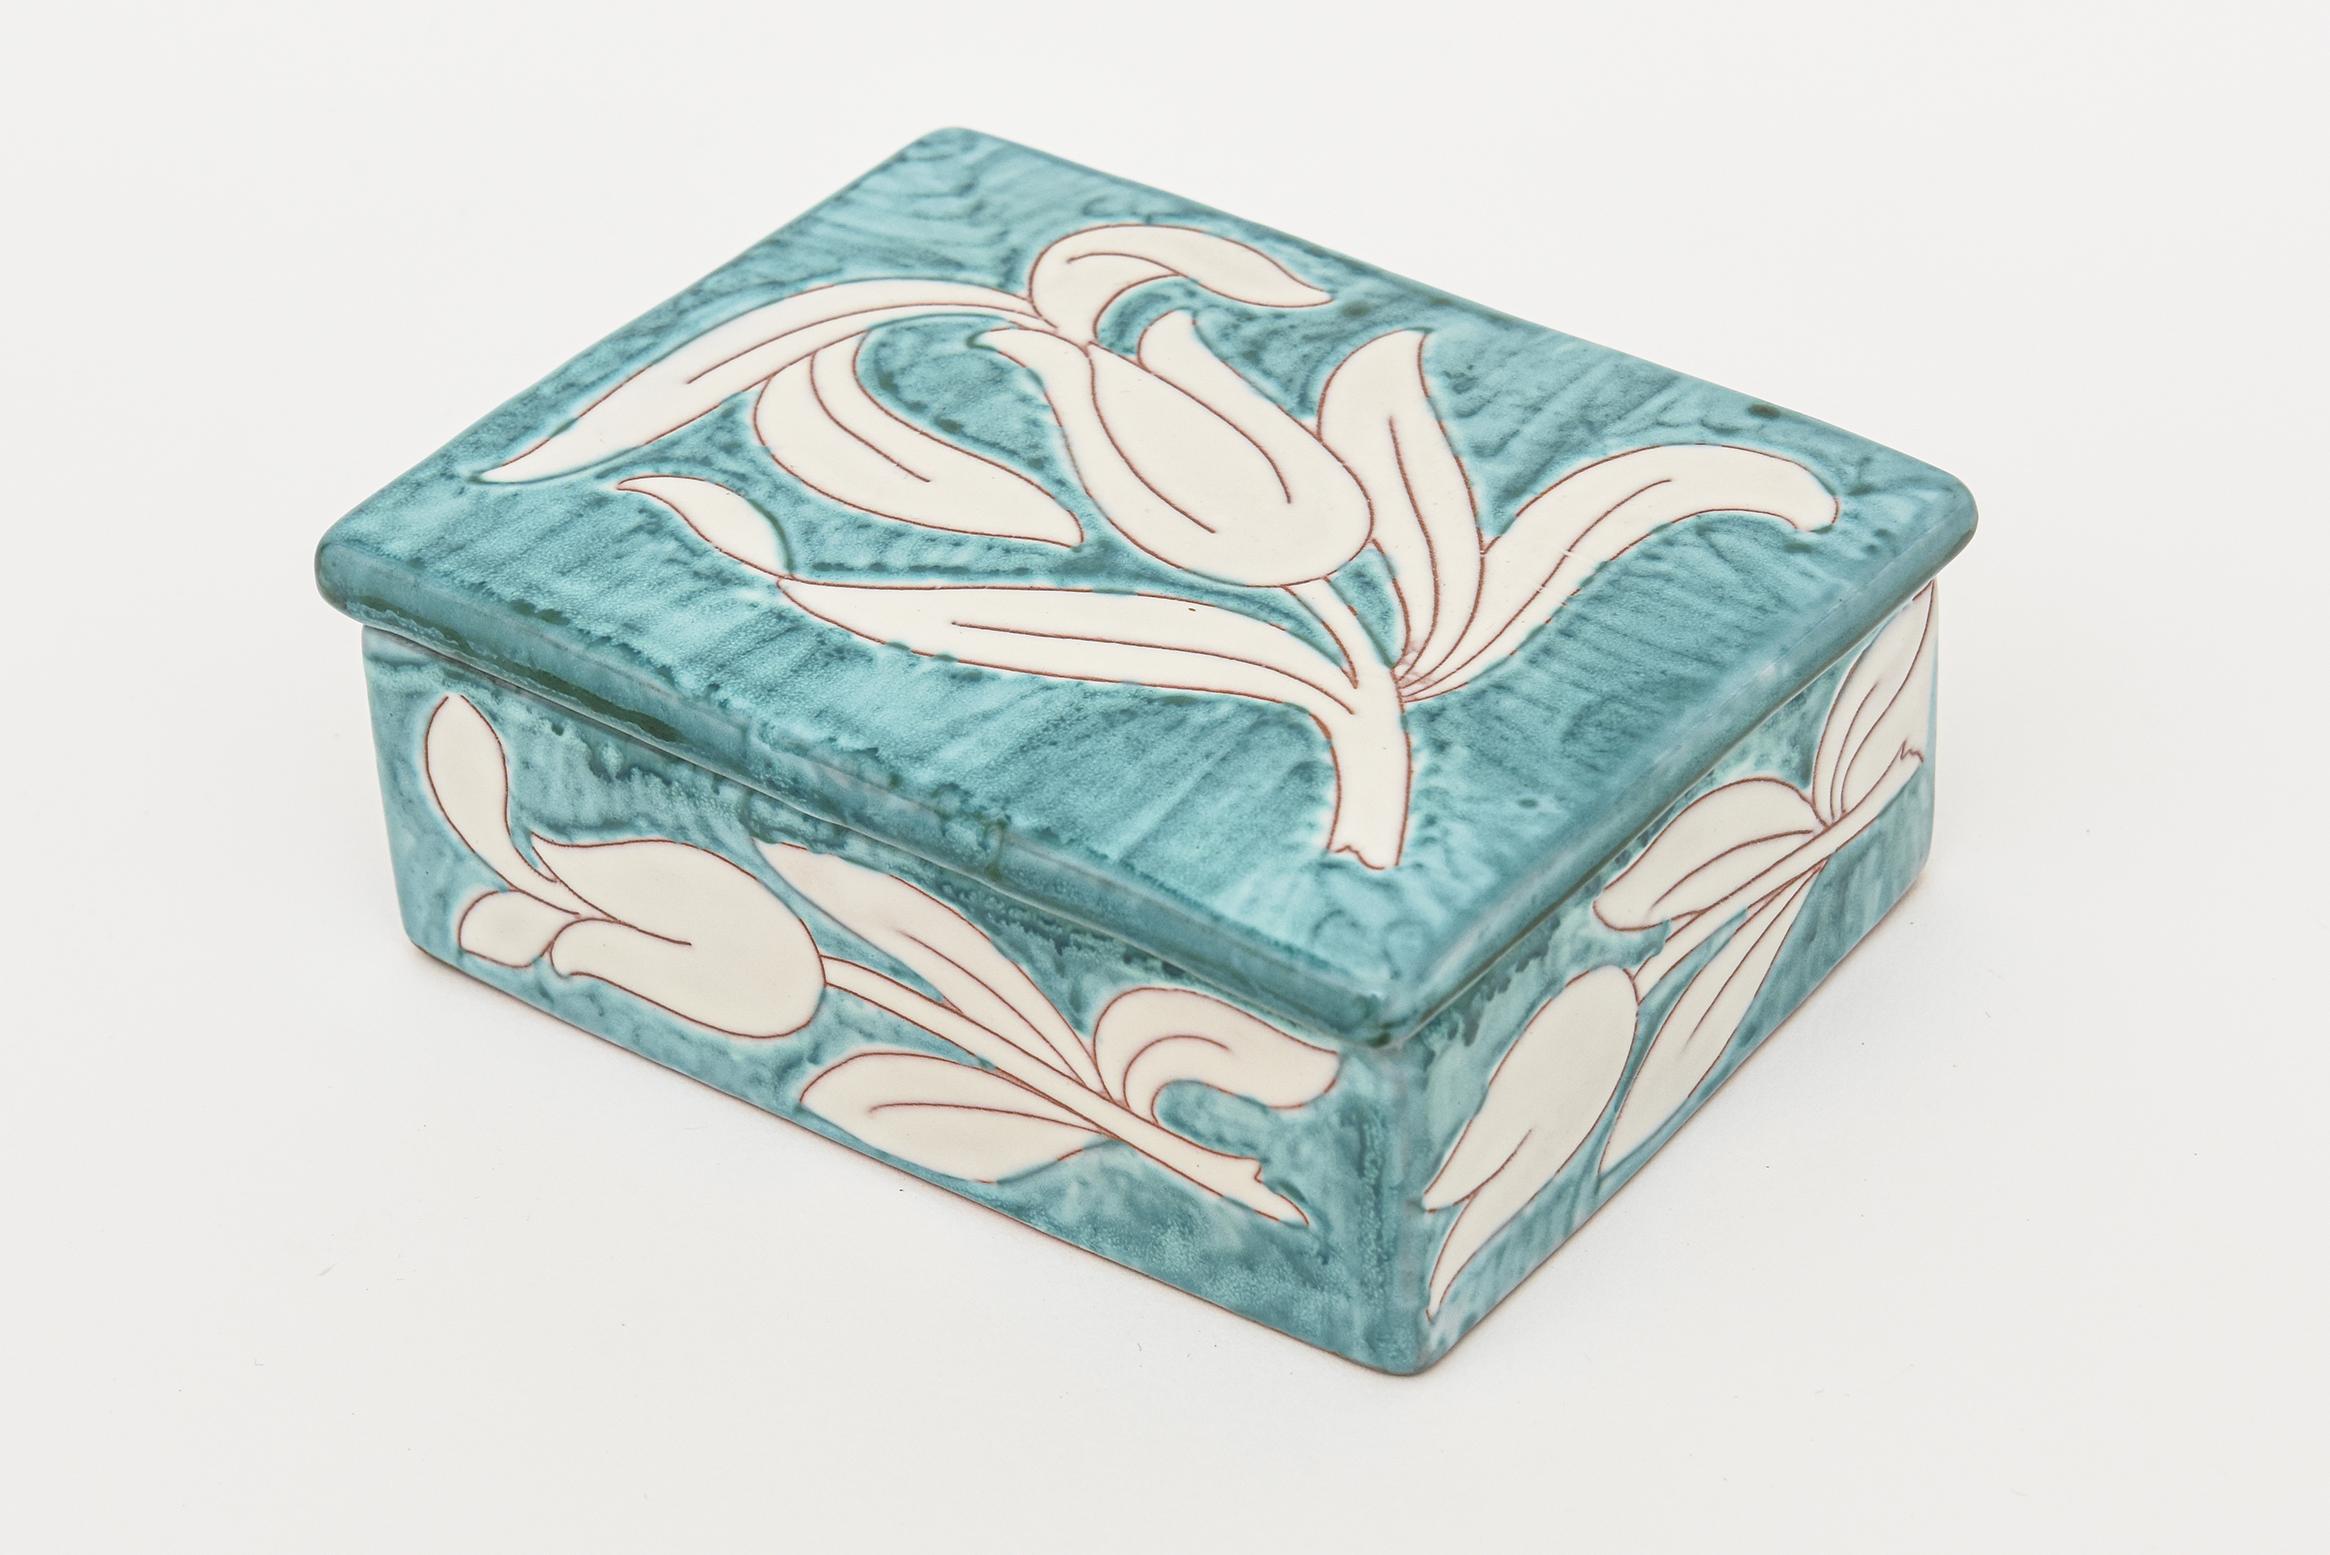 This lovely vintage Italian hallmarked lidded ceramic flower box by Raymor is from the 60's. The colors are turquoise, white with outlines of gray charcoal. The hallmarks read 03529 Italy rpv. Makes a great desk accessory. 